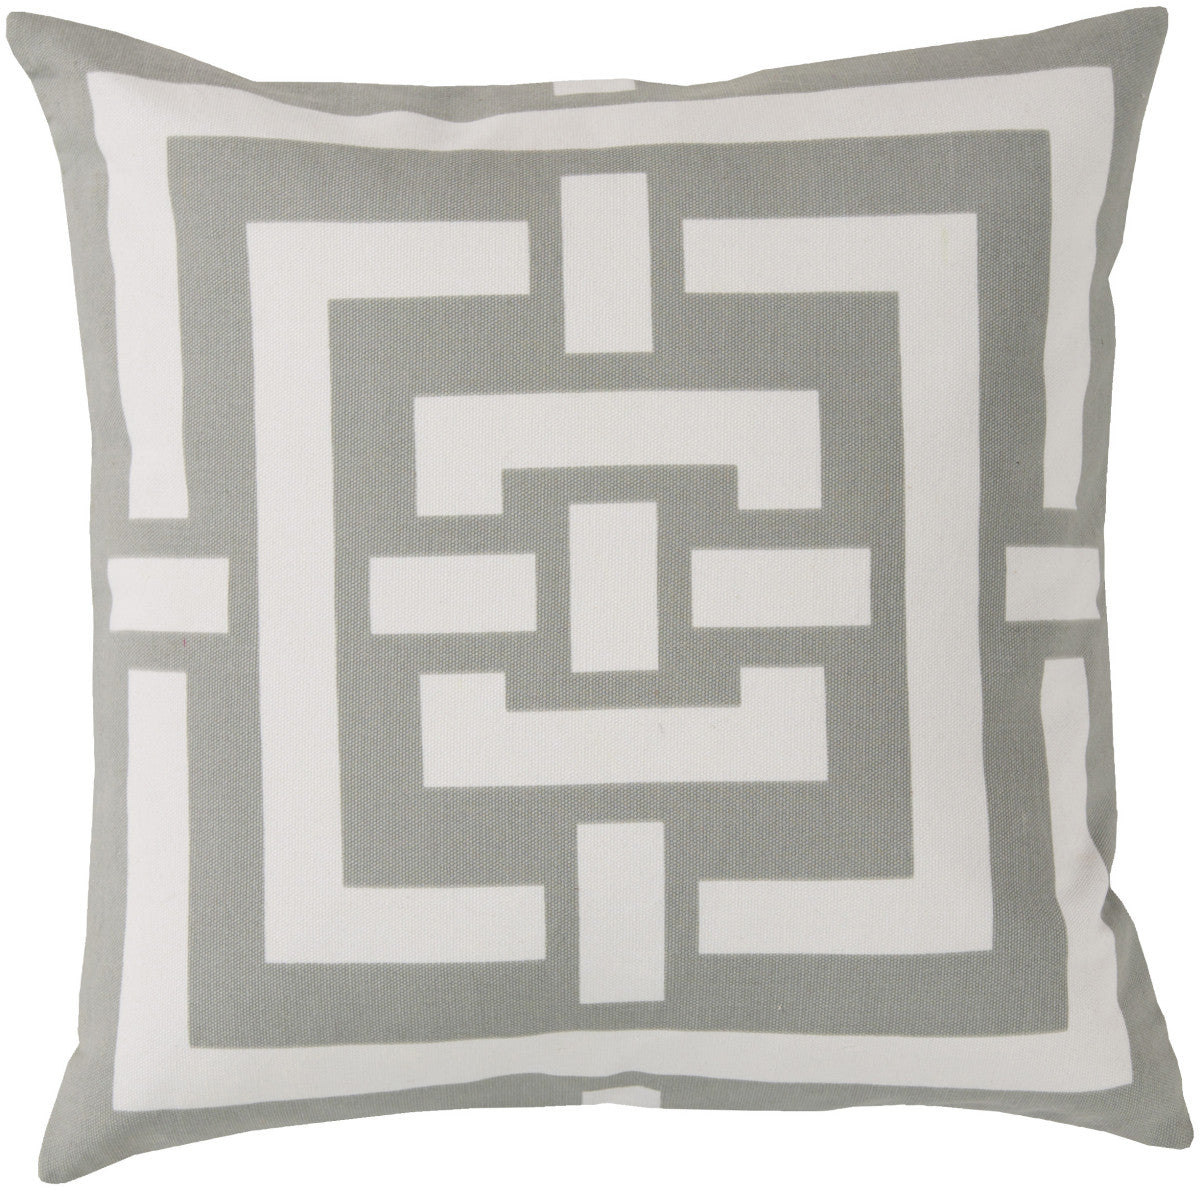 Surya Circles and Squares Charming Criss Cross FB-002 Pillow by Florence Broadhurst